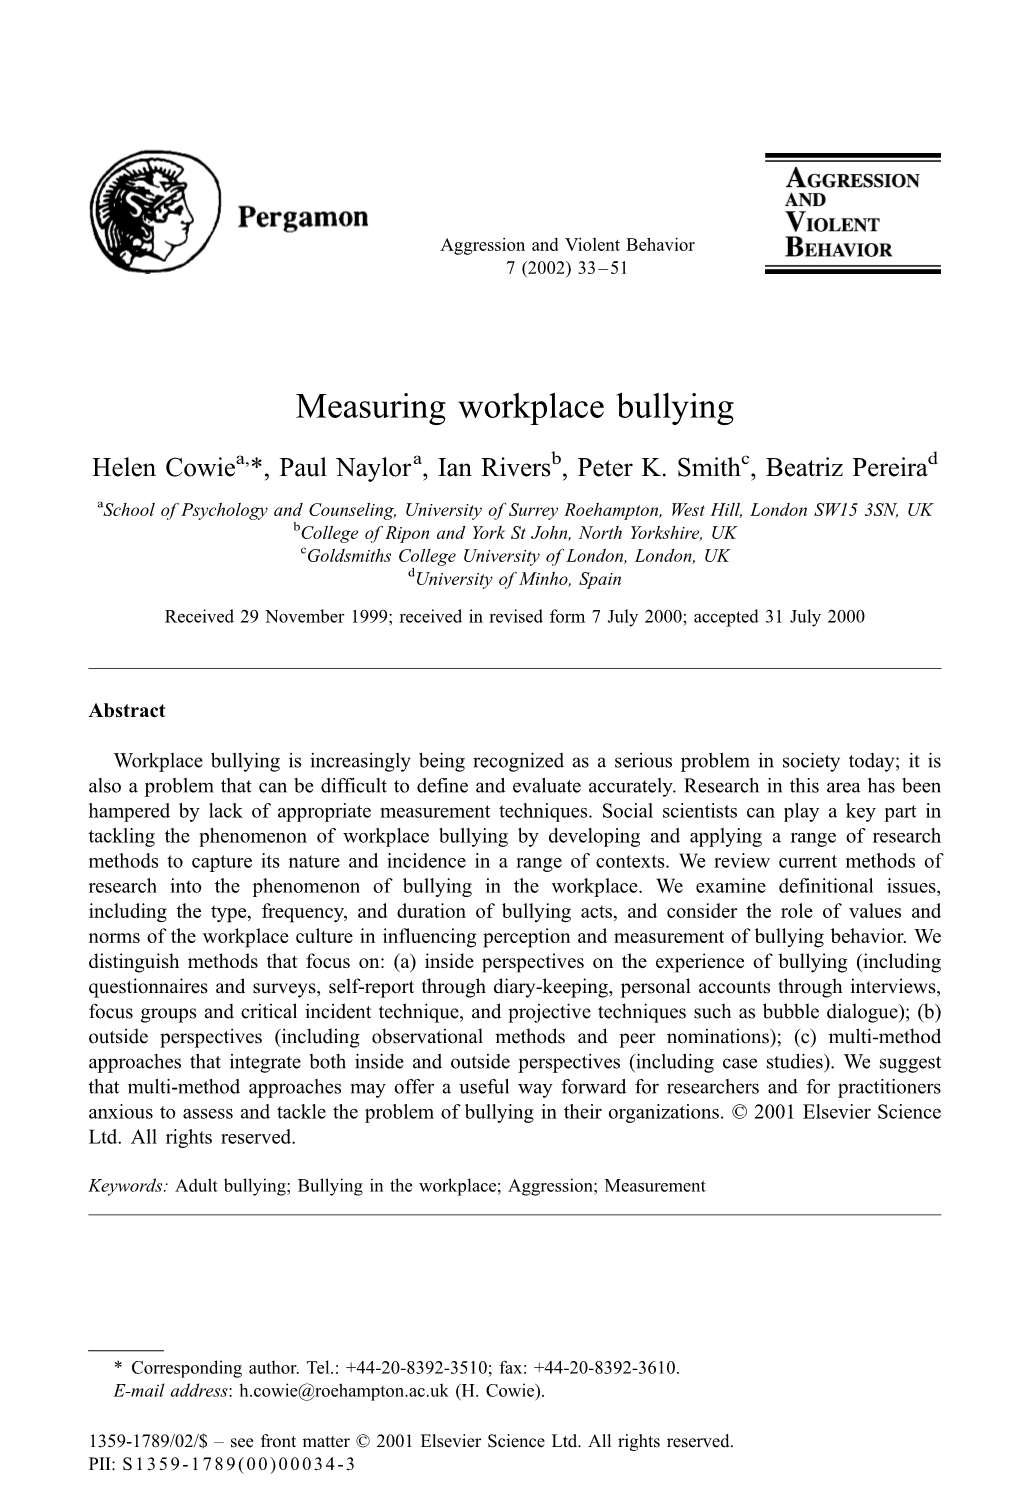 Measuring Workplace Bullying